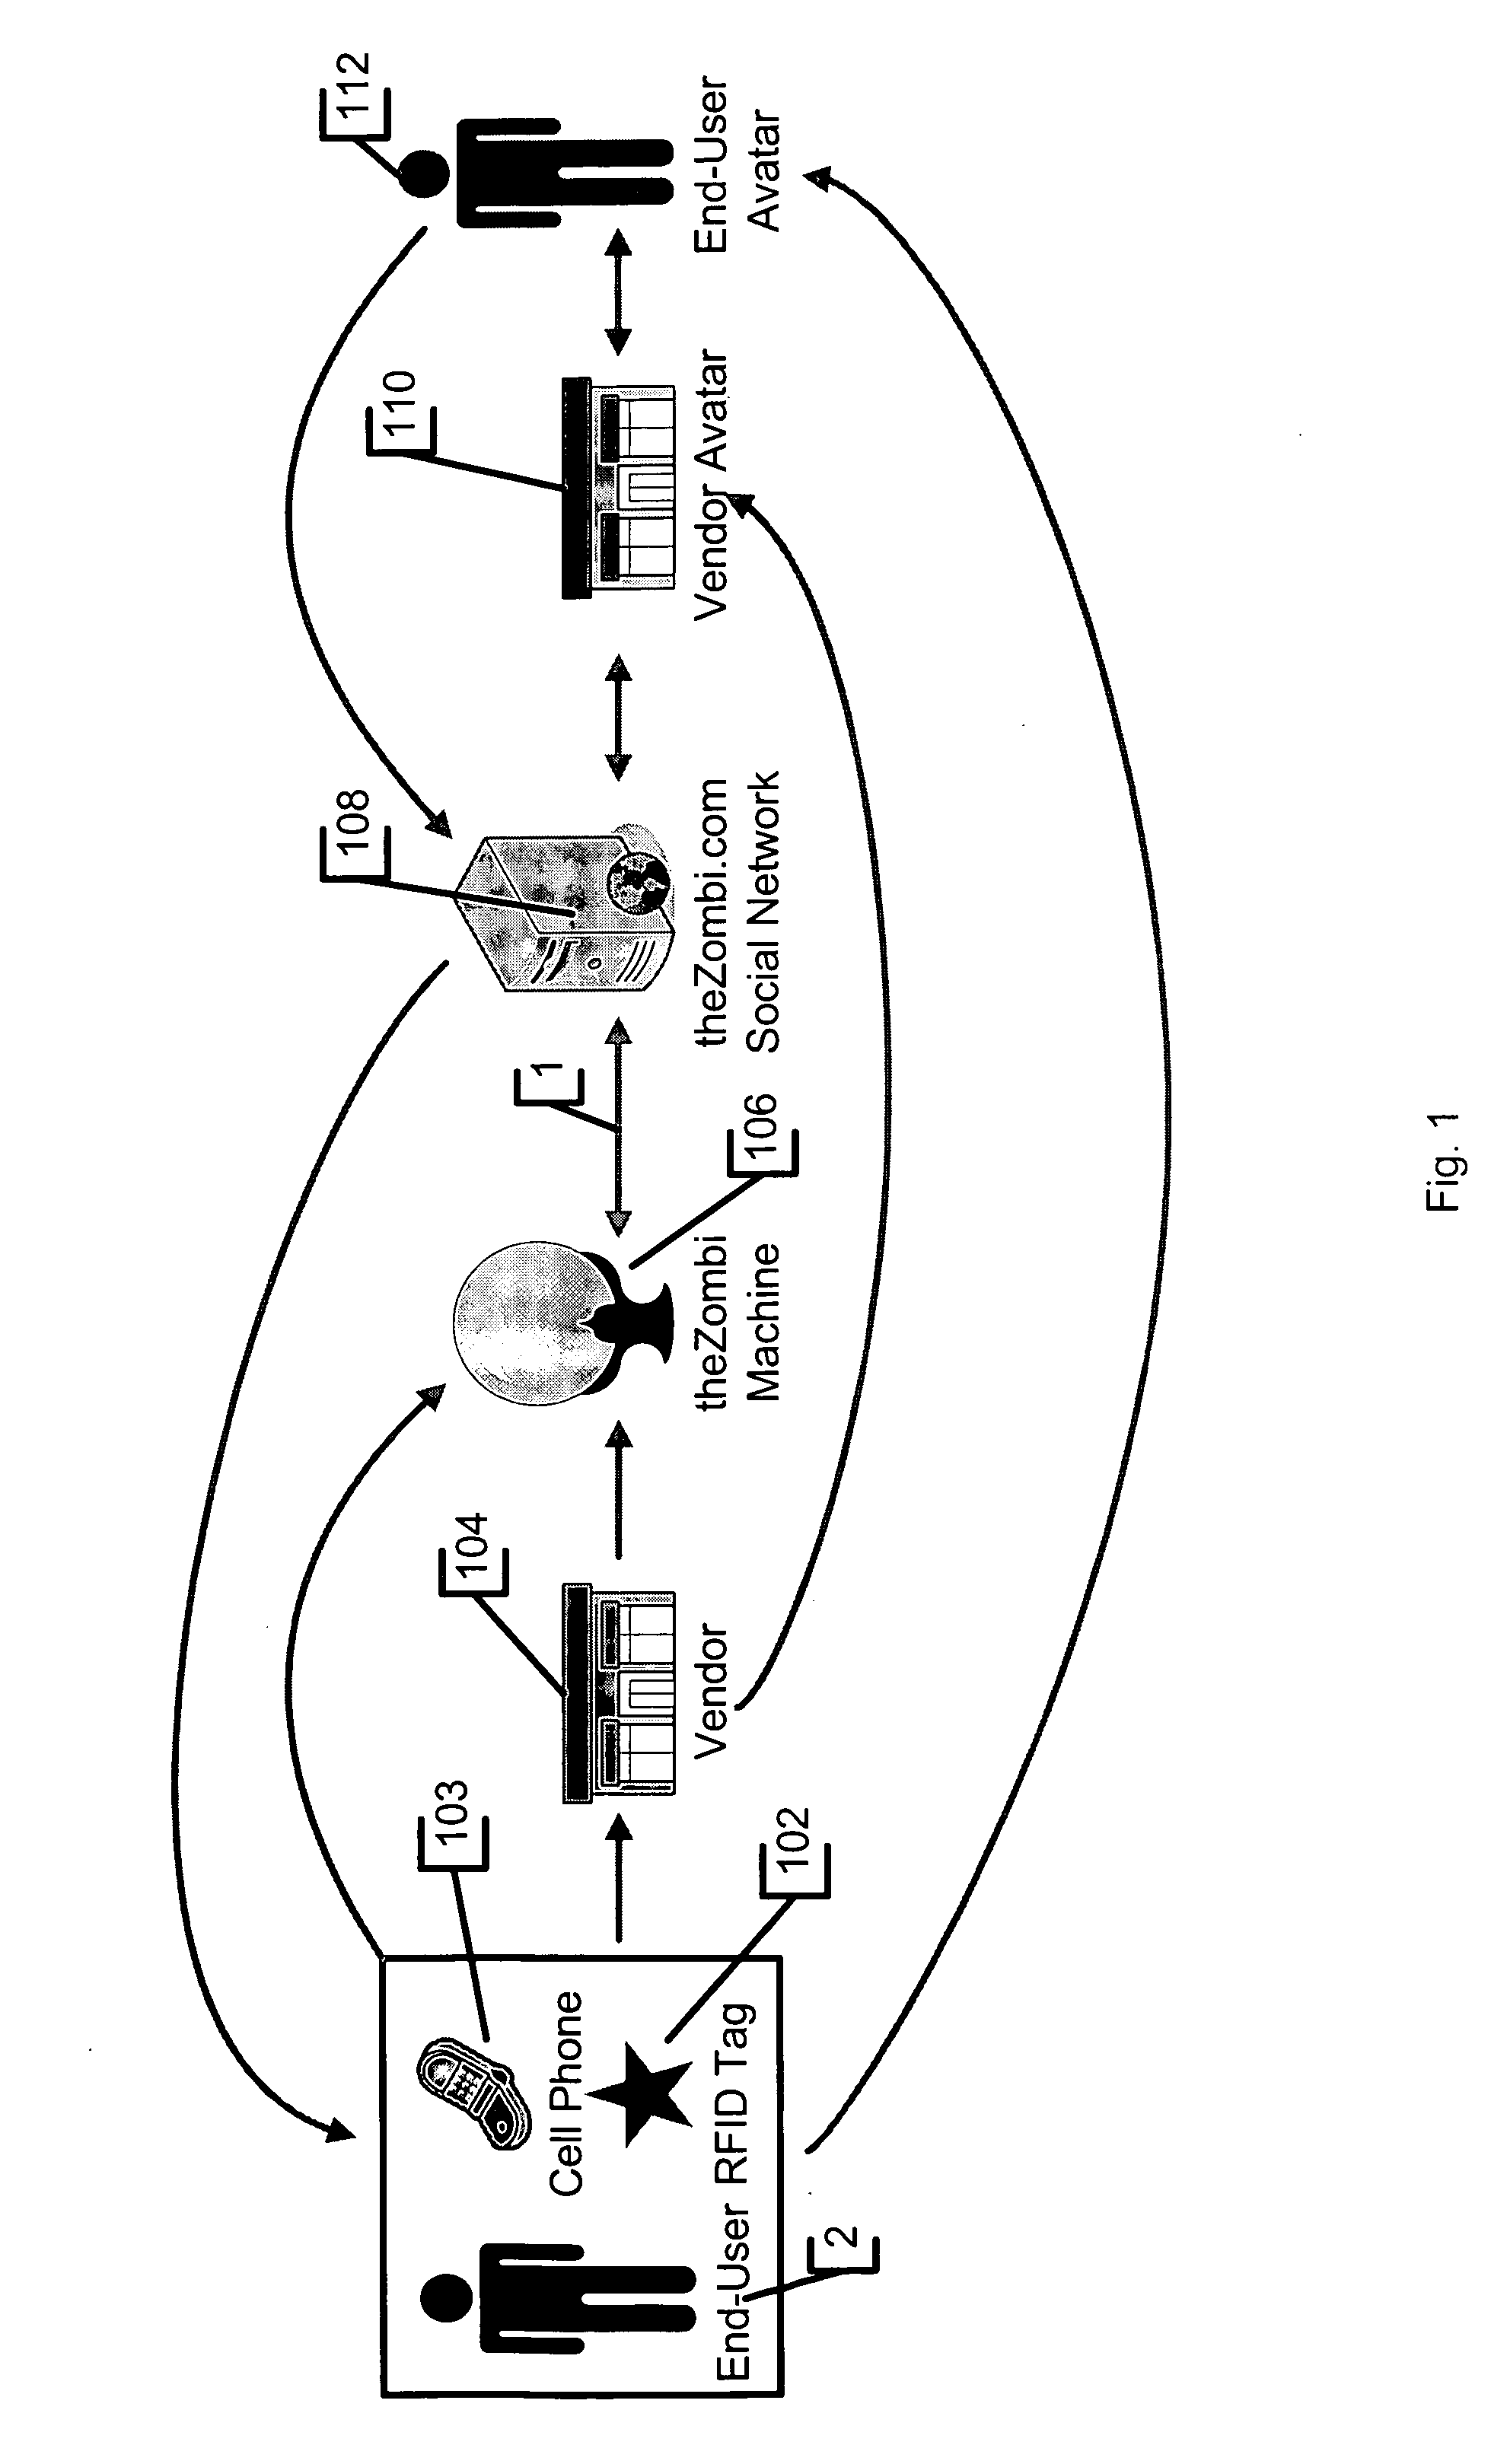 System and method for tracking individuals via remote transmitters attached to personal items